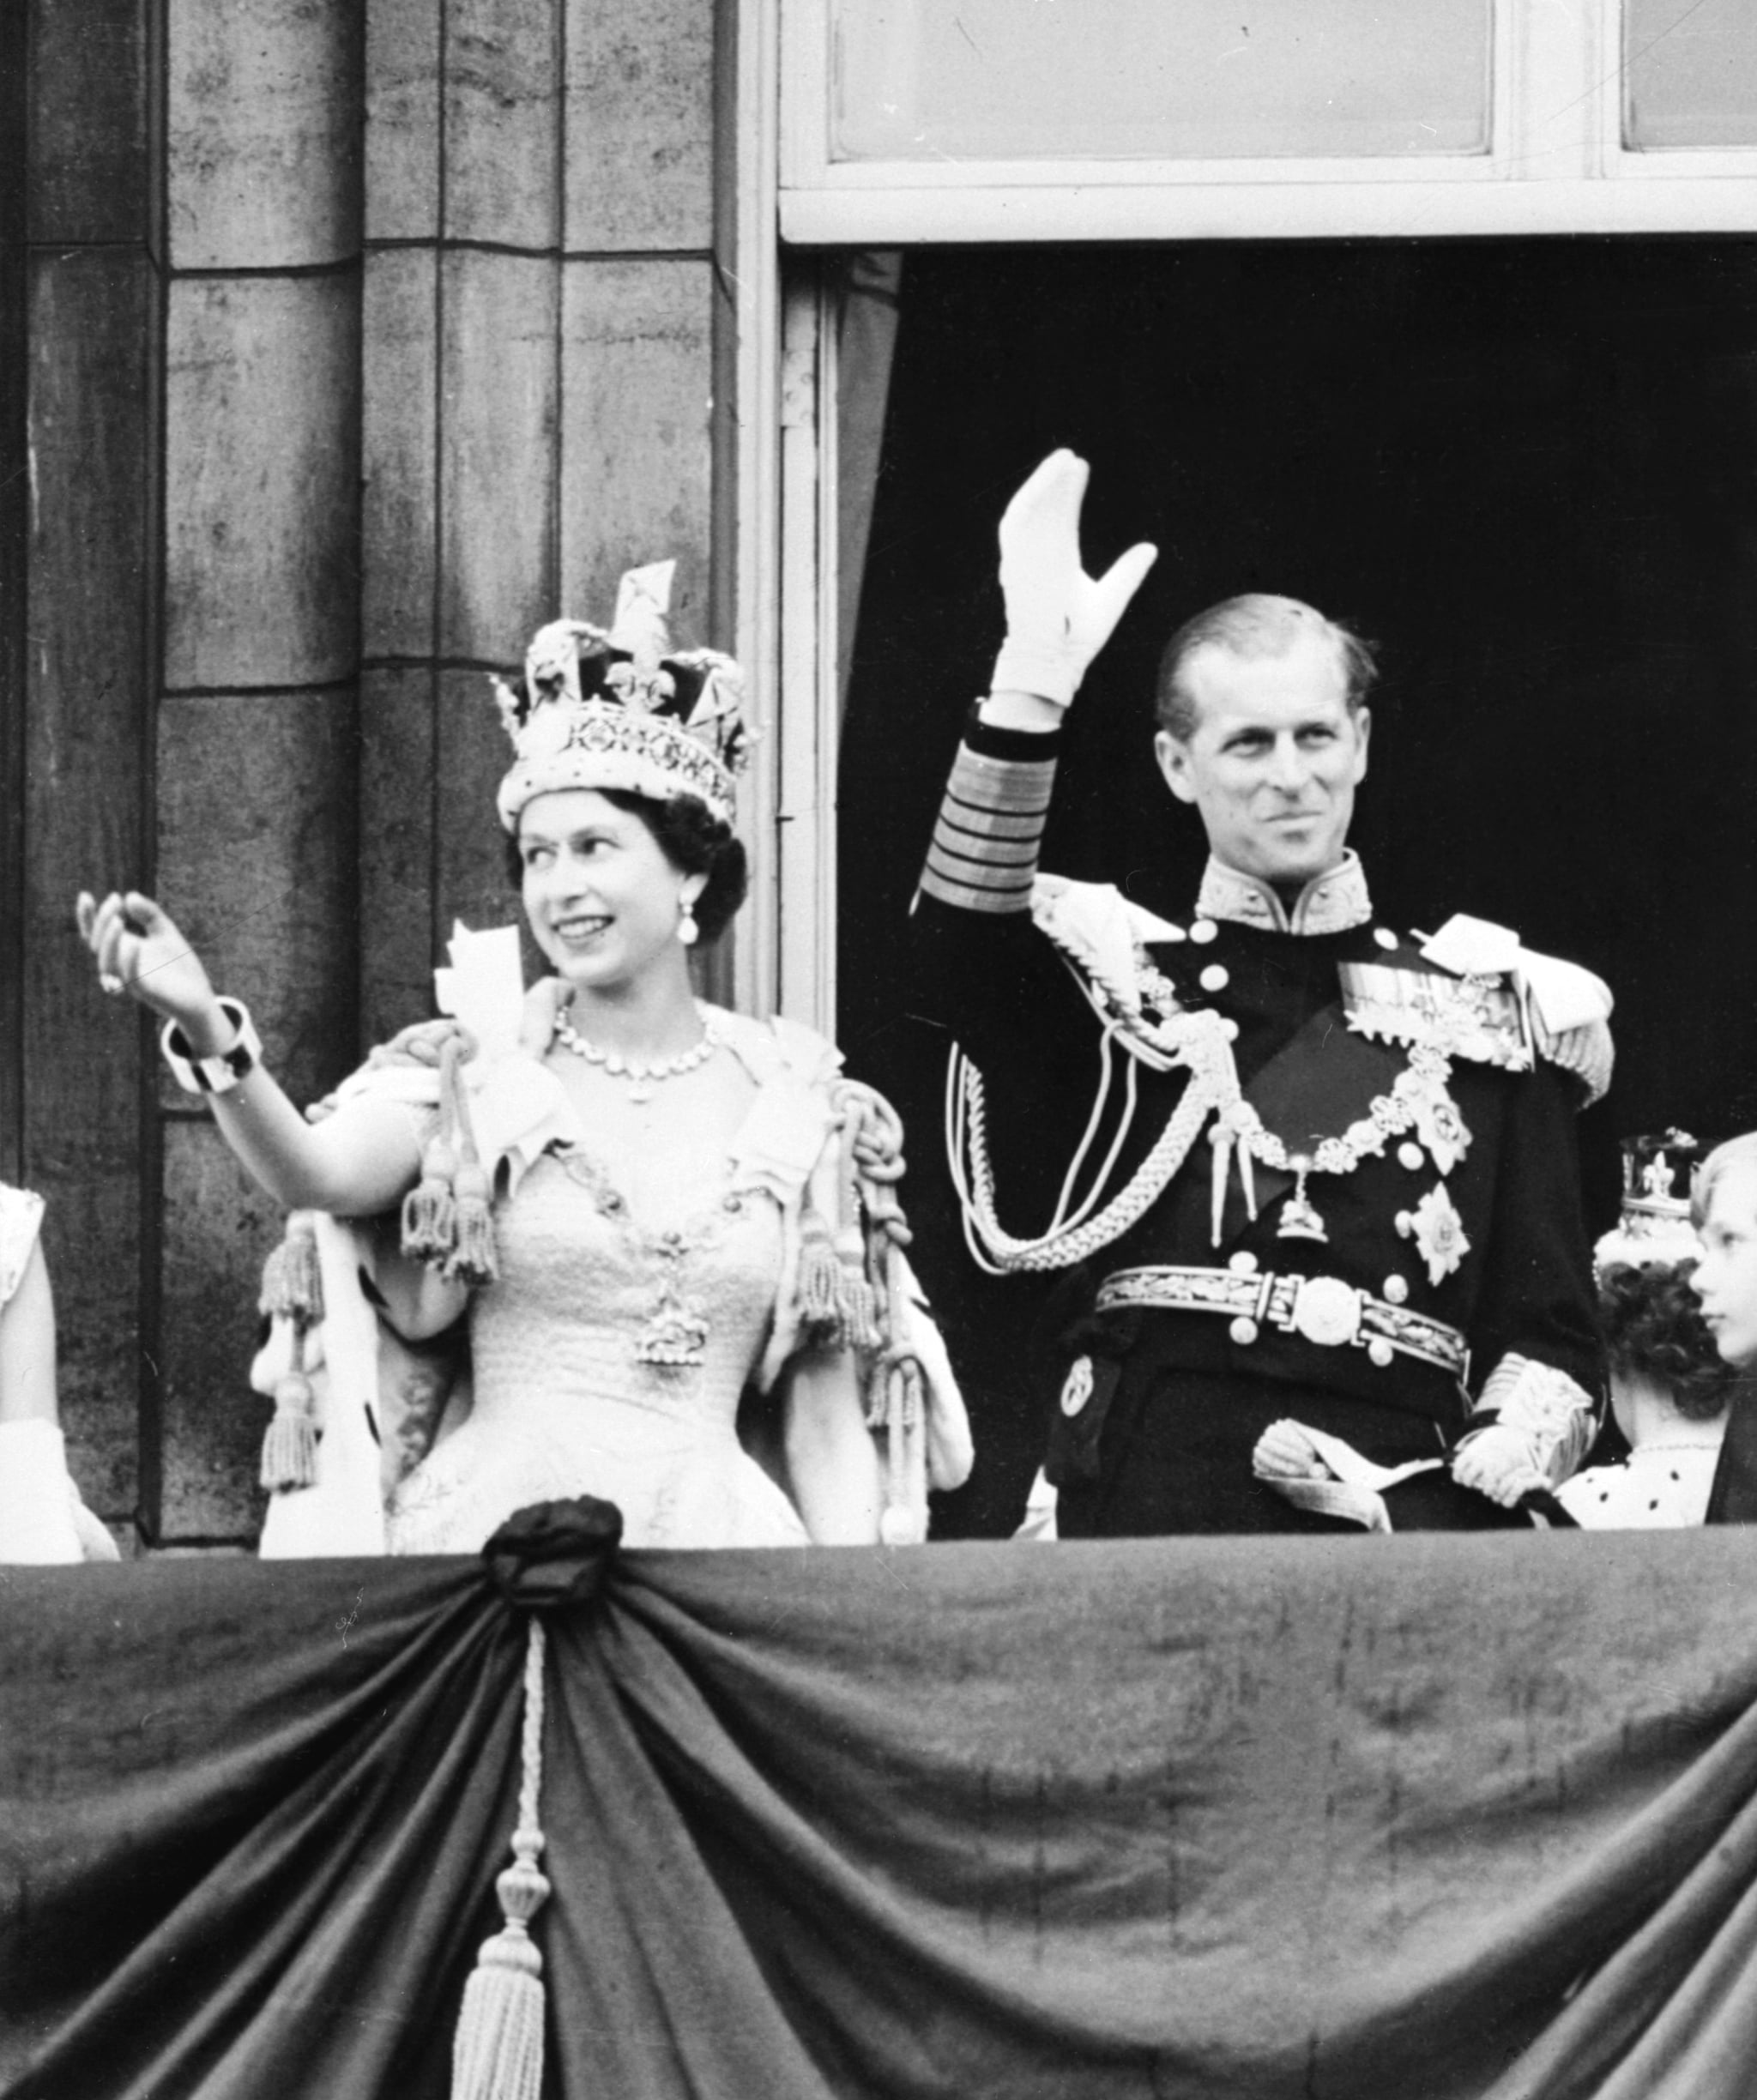 LONDON, UNITED KINGDOM - JUNE 2: Queen Elizabeth II, accompanied by Prince Philip, waves to the crowd after being crowned at Westminter Abbey in London on June 2, 1953.  Elizabeth married the Duke of Edinburgh on November 20, 1947 and was made Queen in 1952 at the age of 25.  Her coronation was the first global television event.  (Photo credit should be STF / AFP / Getty Images)